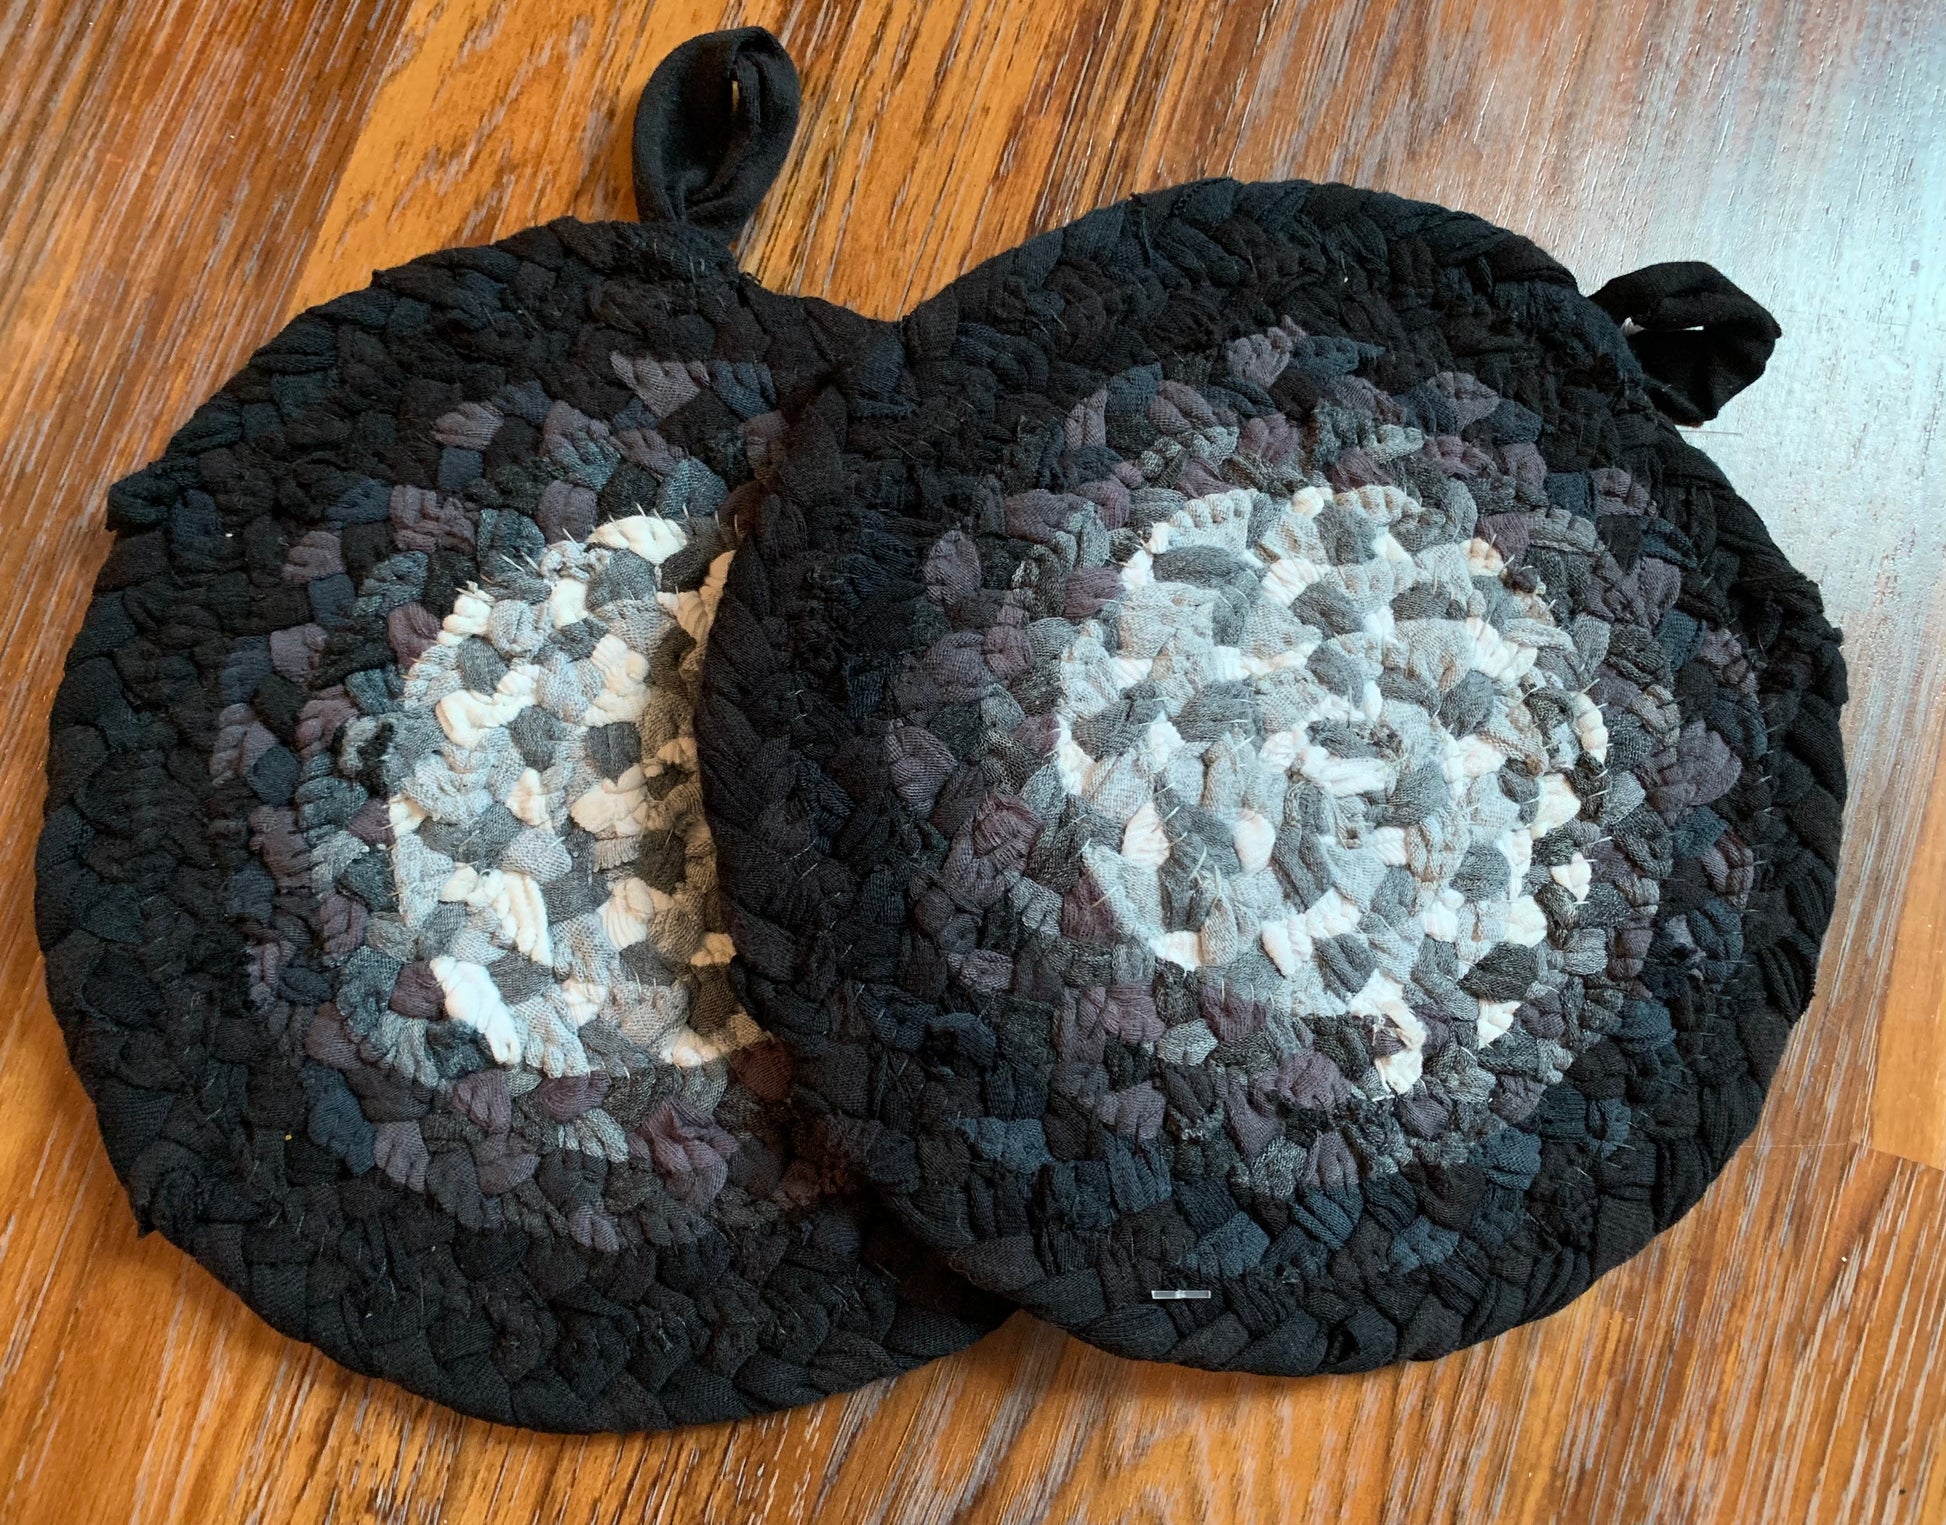 Back of a set of two trivet potholders, showing stitching, lay flat on a wood surface.